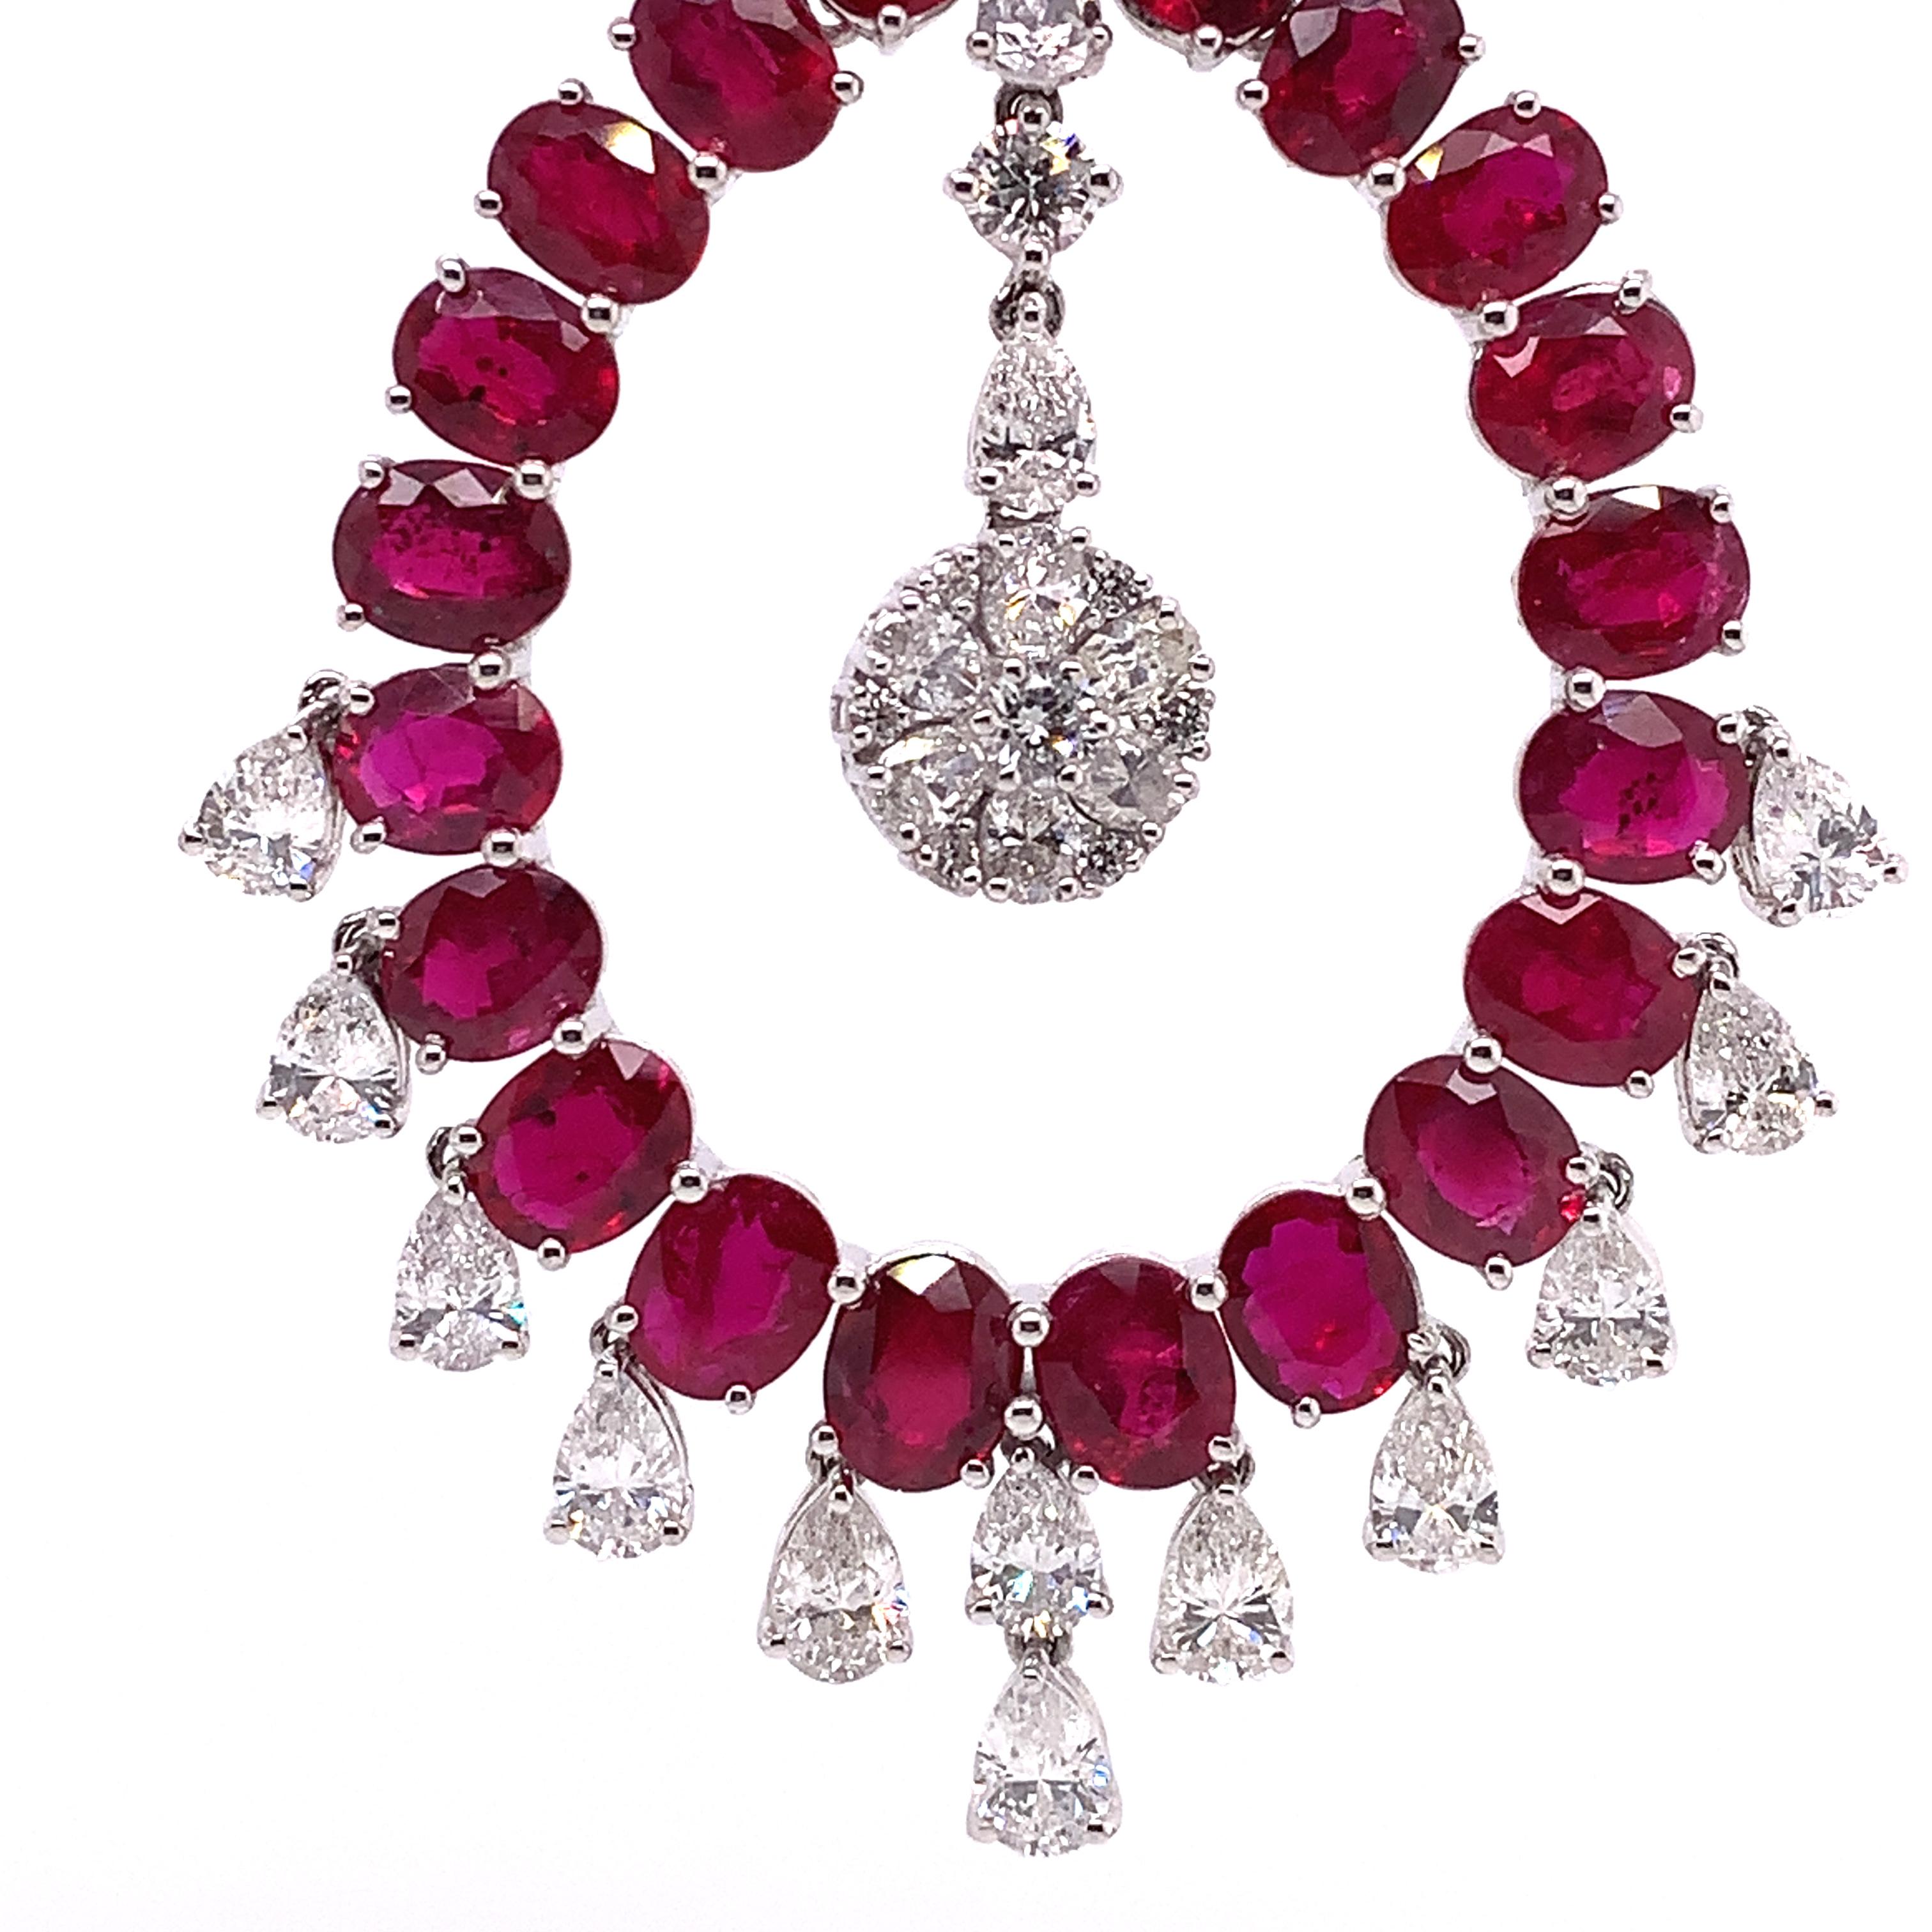 18K White Gold
Ruby: 19.30ct total weight.
Diamond: 5.17ct total weight.
All diamonds are G-H/SI stones.